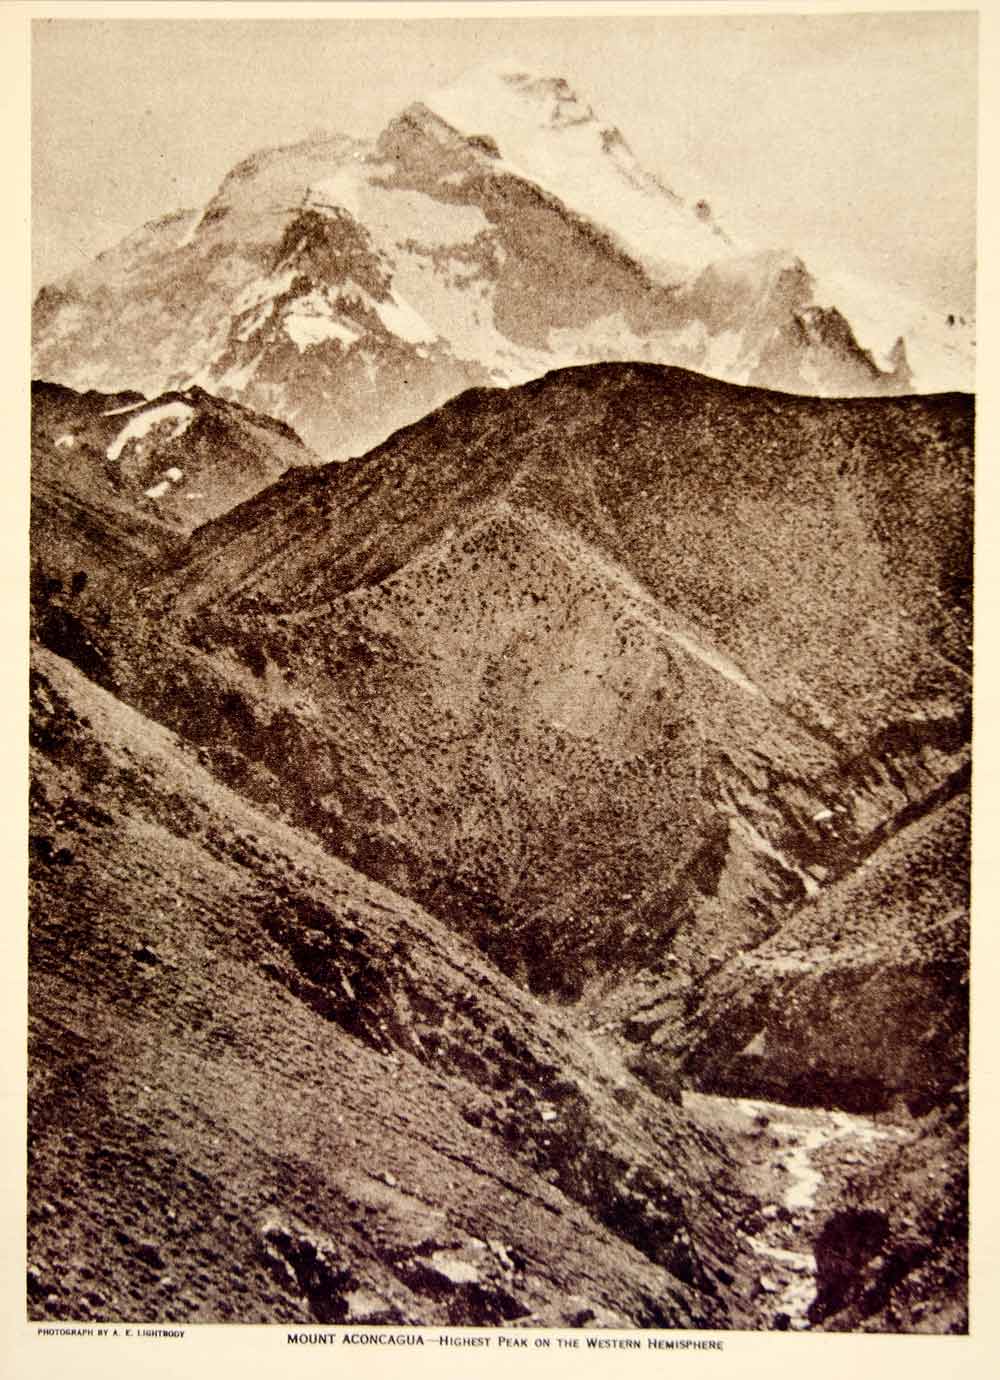 1920 Photogravure Mount Aconcagua Peak Andes Mountains View South America YTTM3